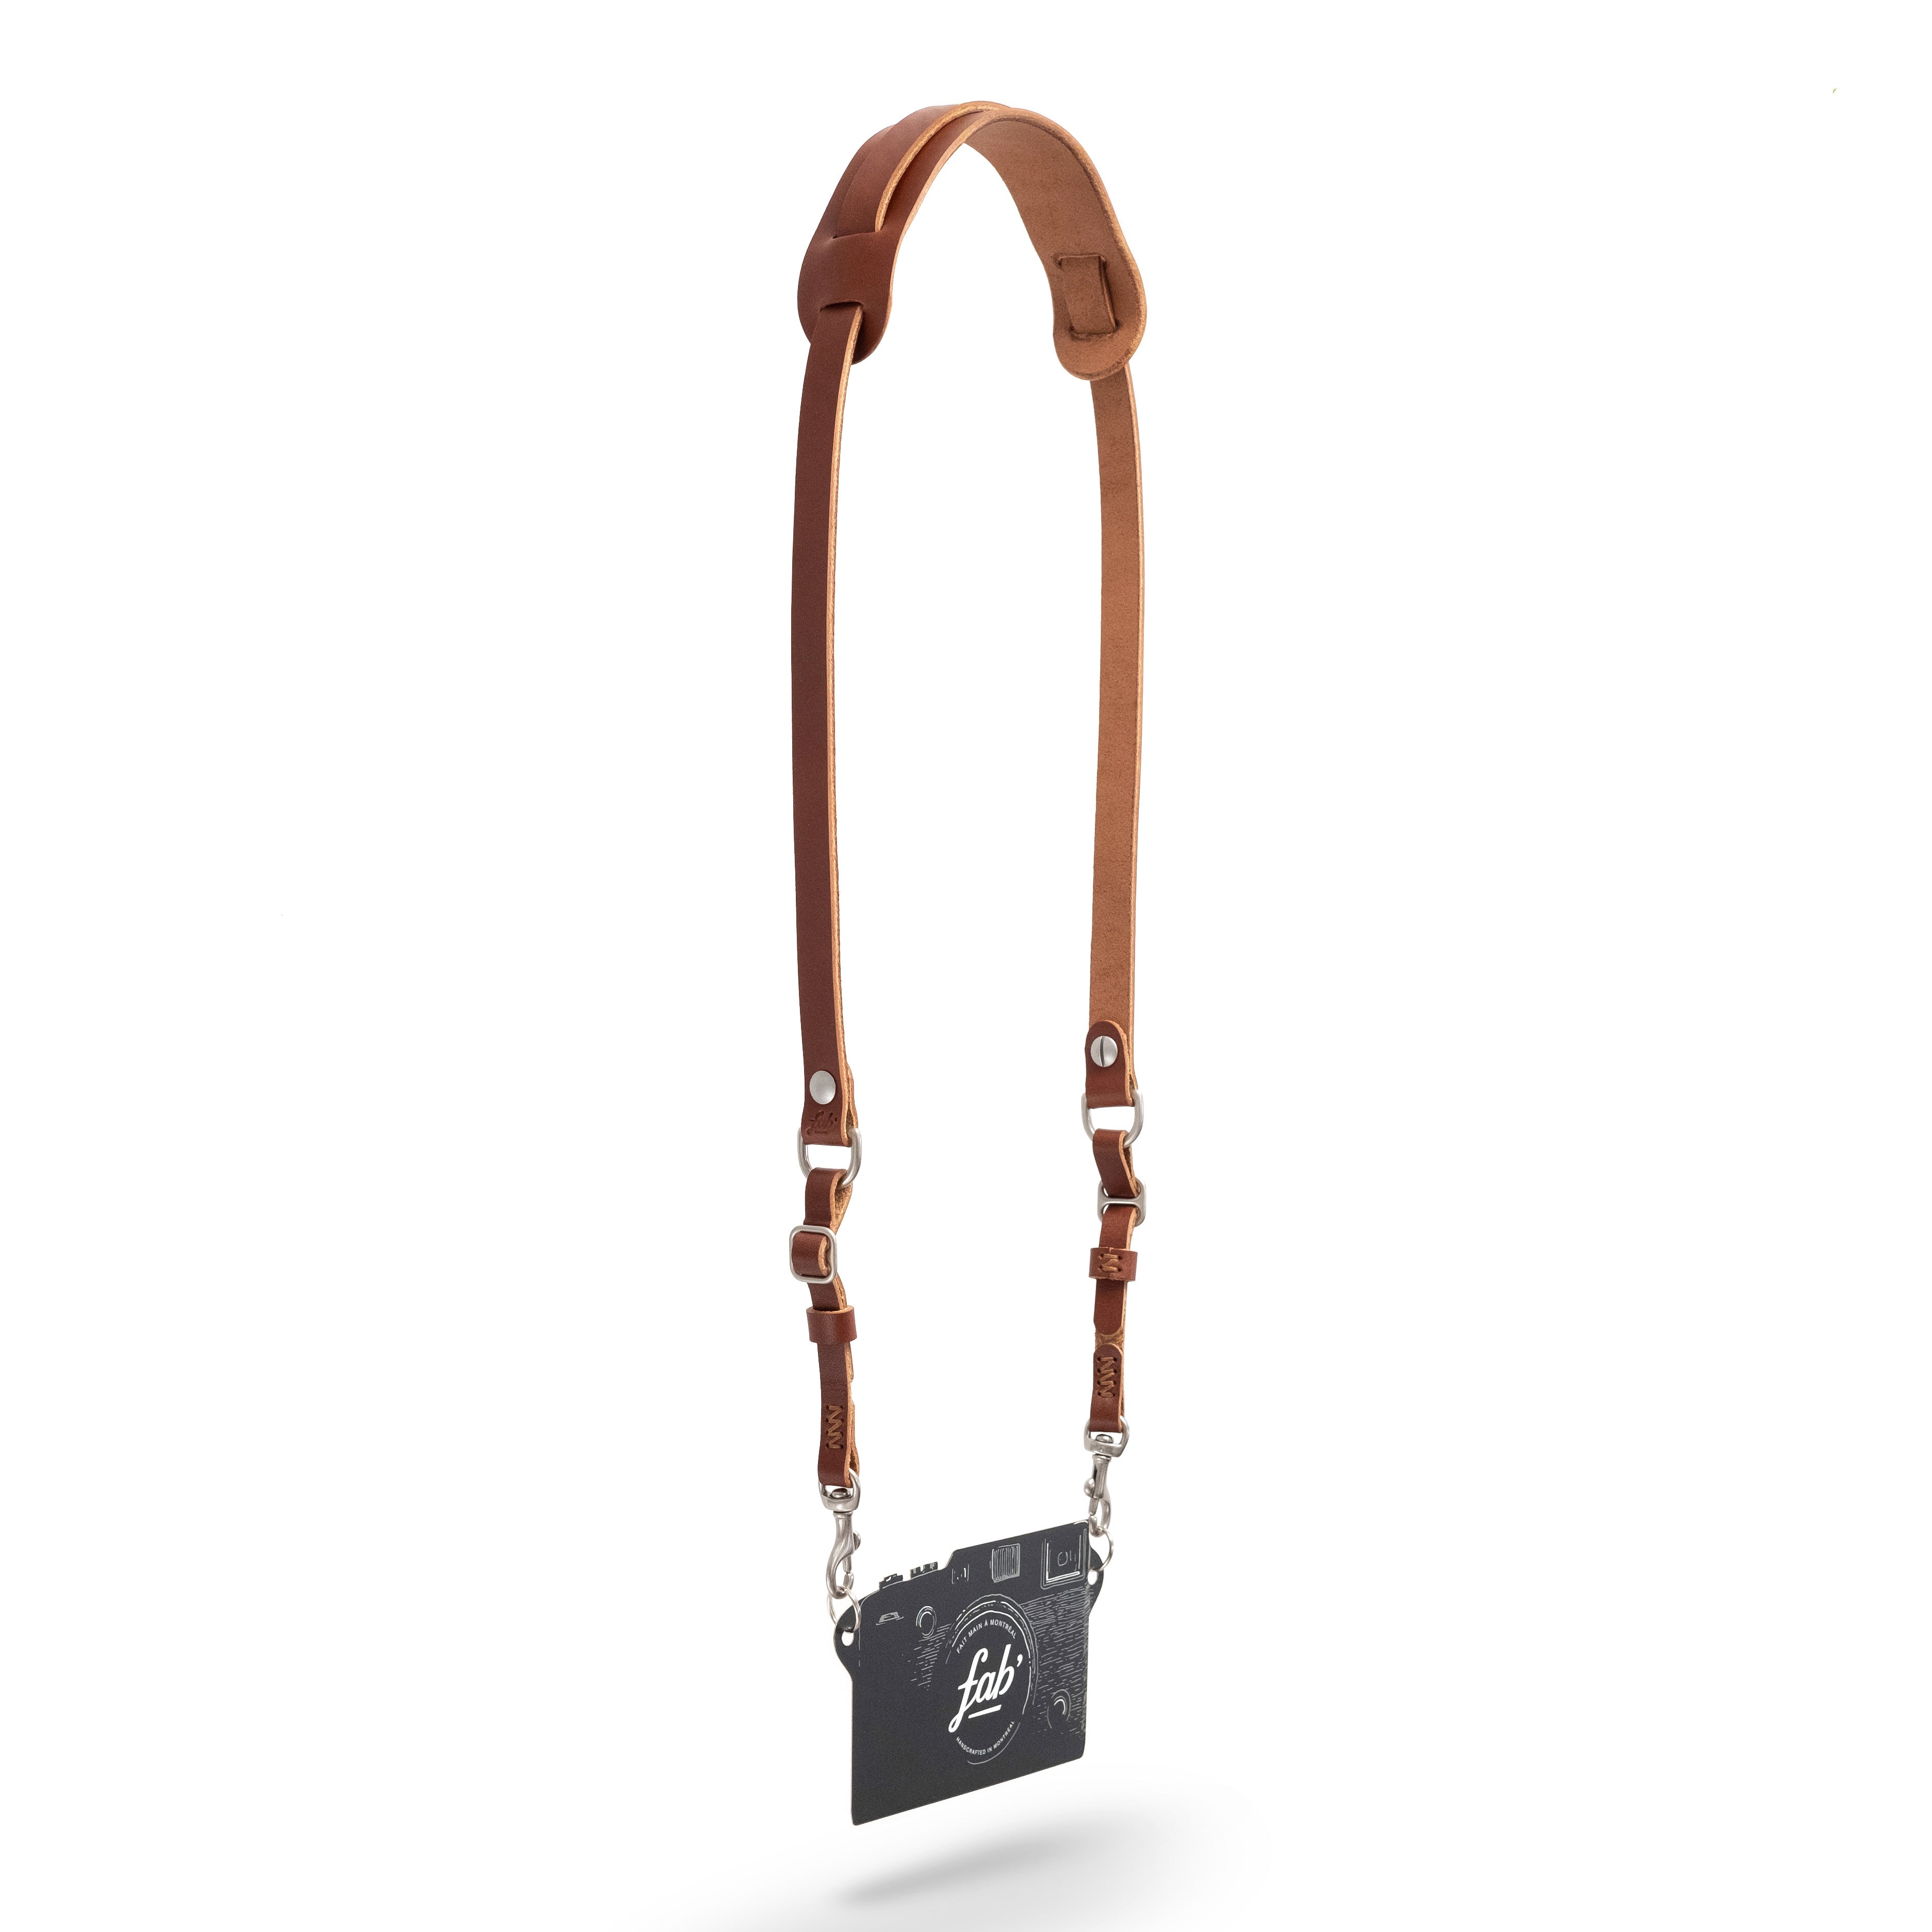 Fab' F11 strap - Brown leather - Size M-L (47")